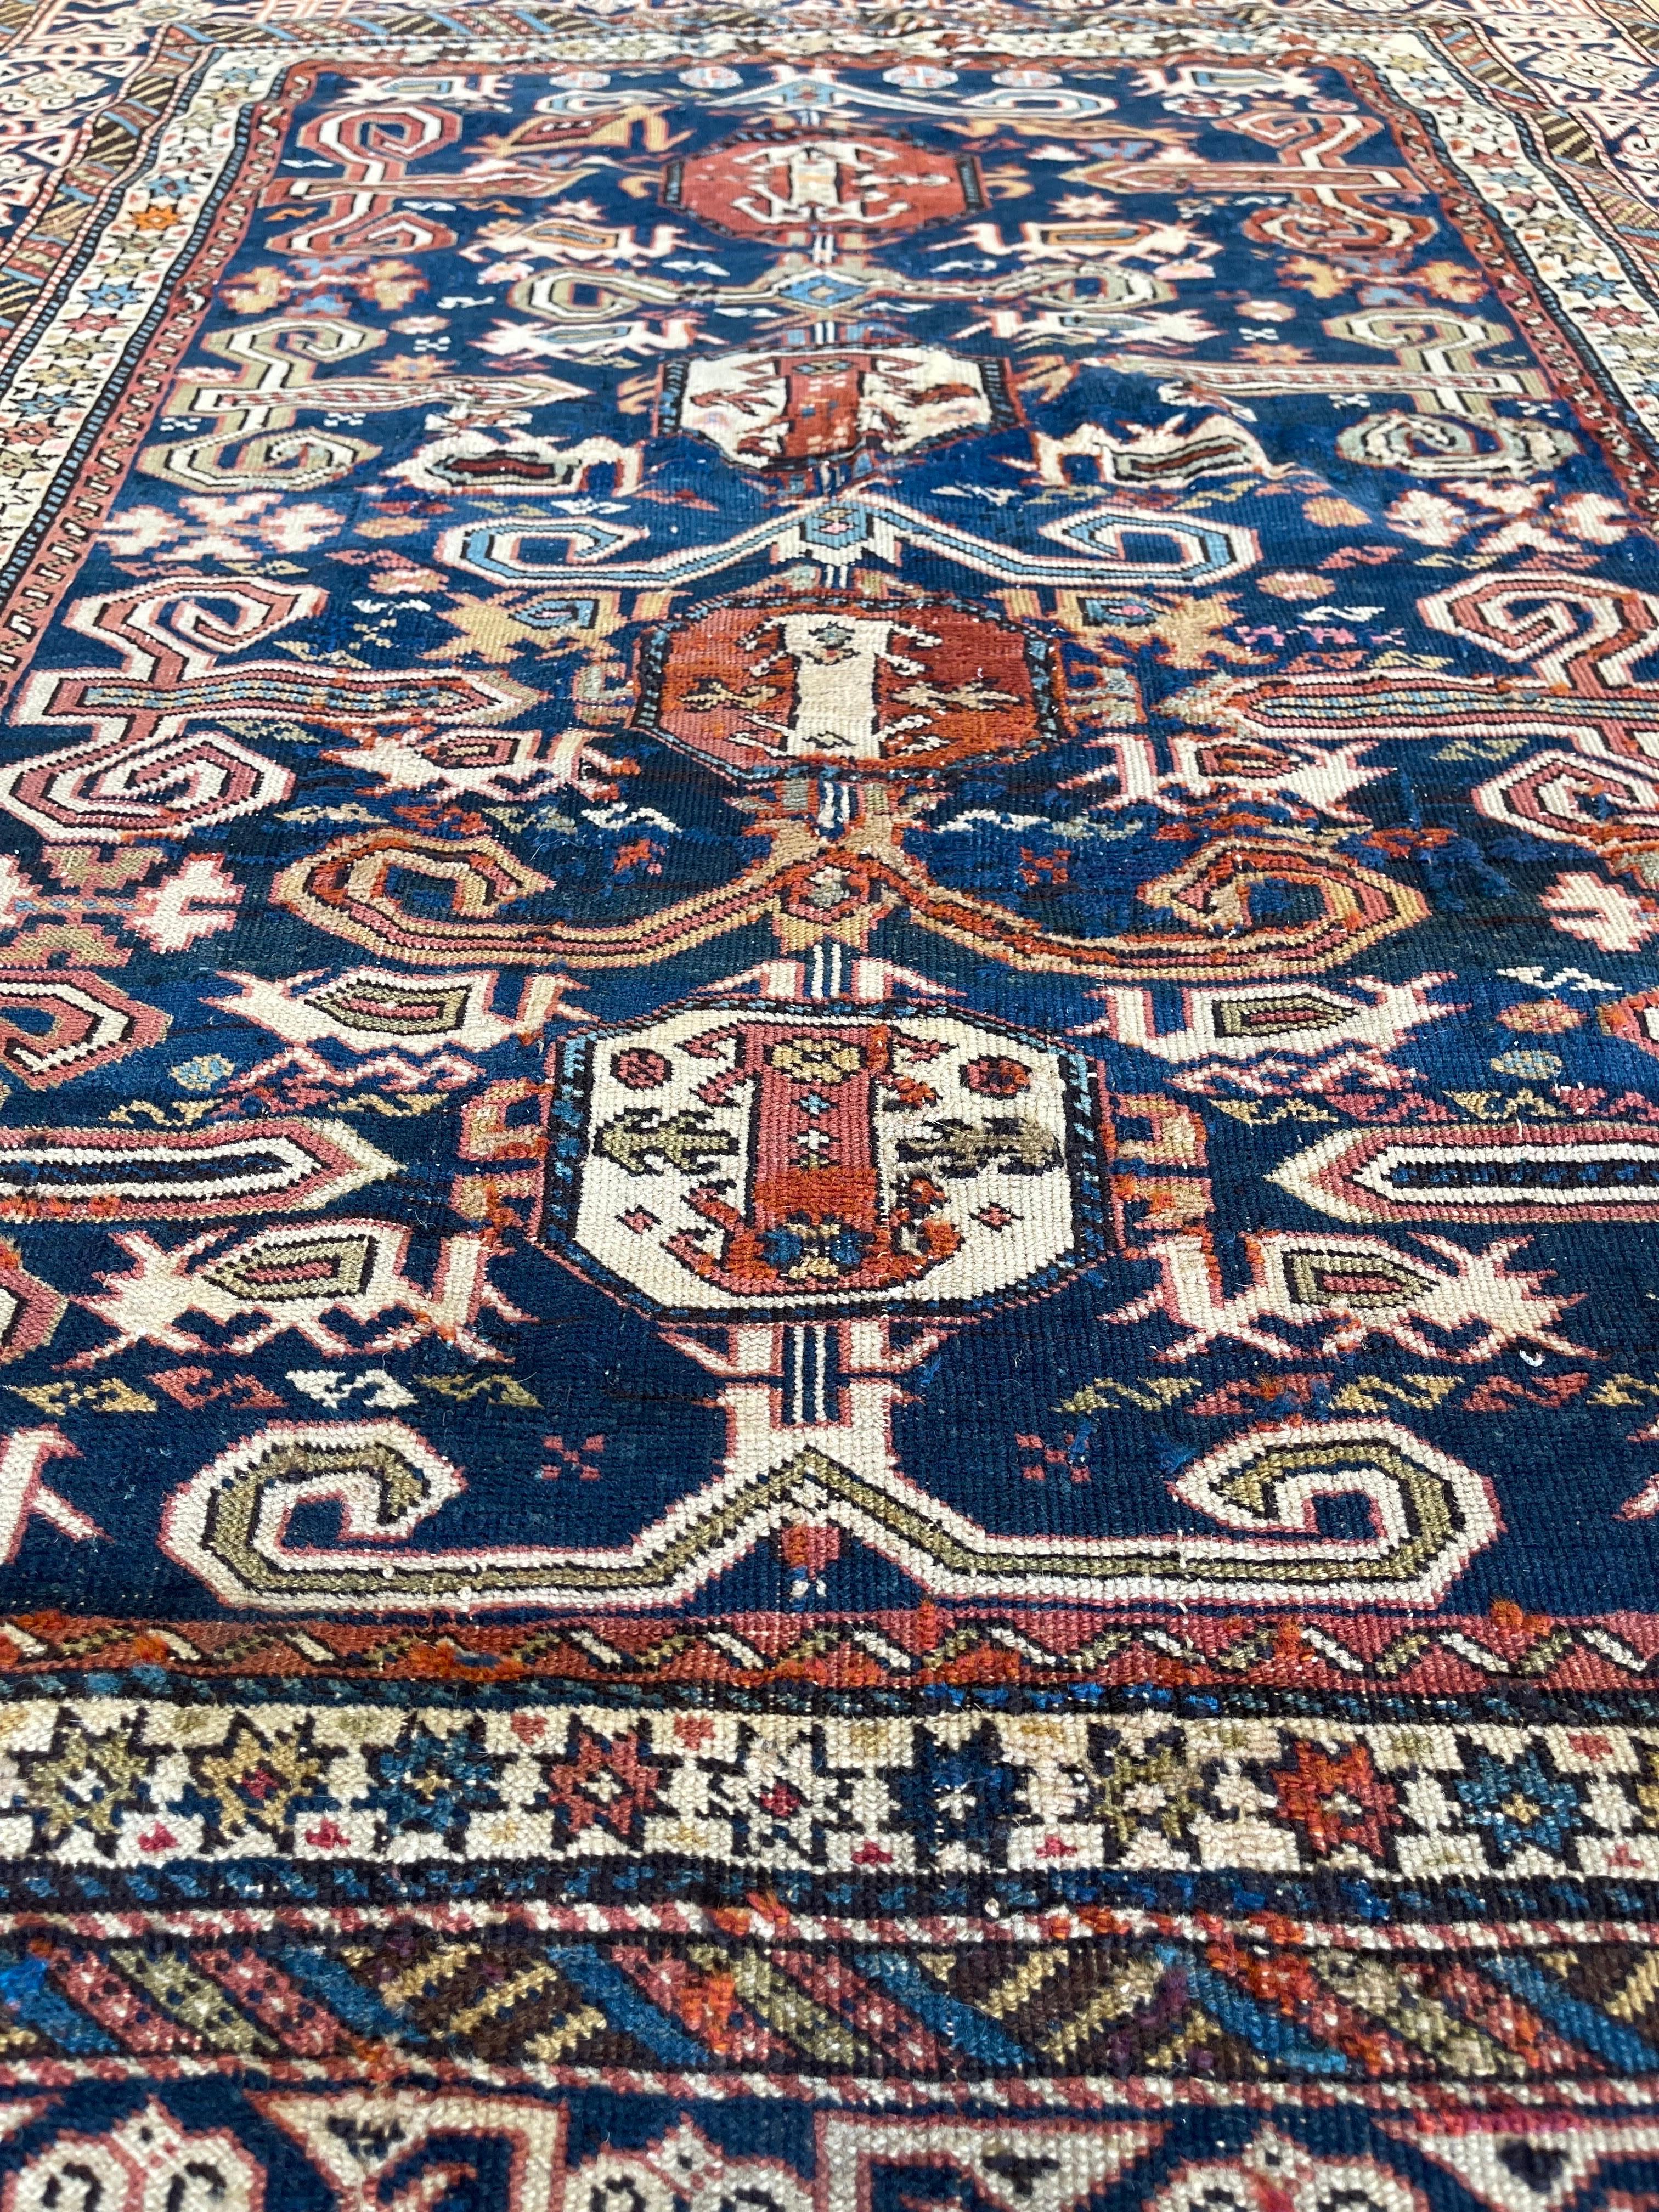 Vegetable Dyed Antique Caucasian Perpedil rug circa 1900 For Sale